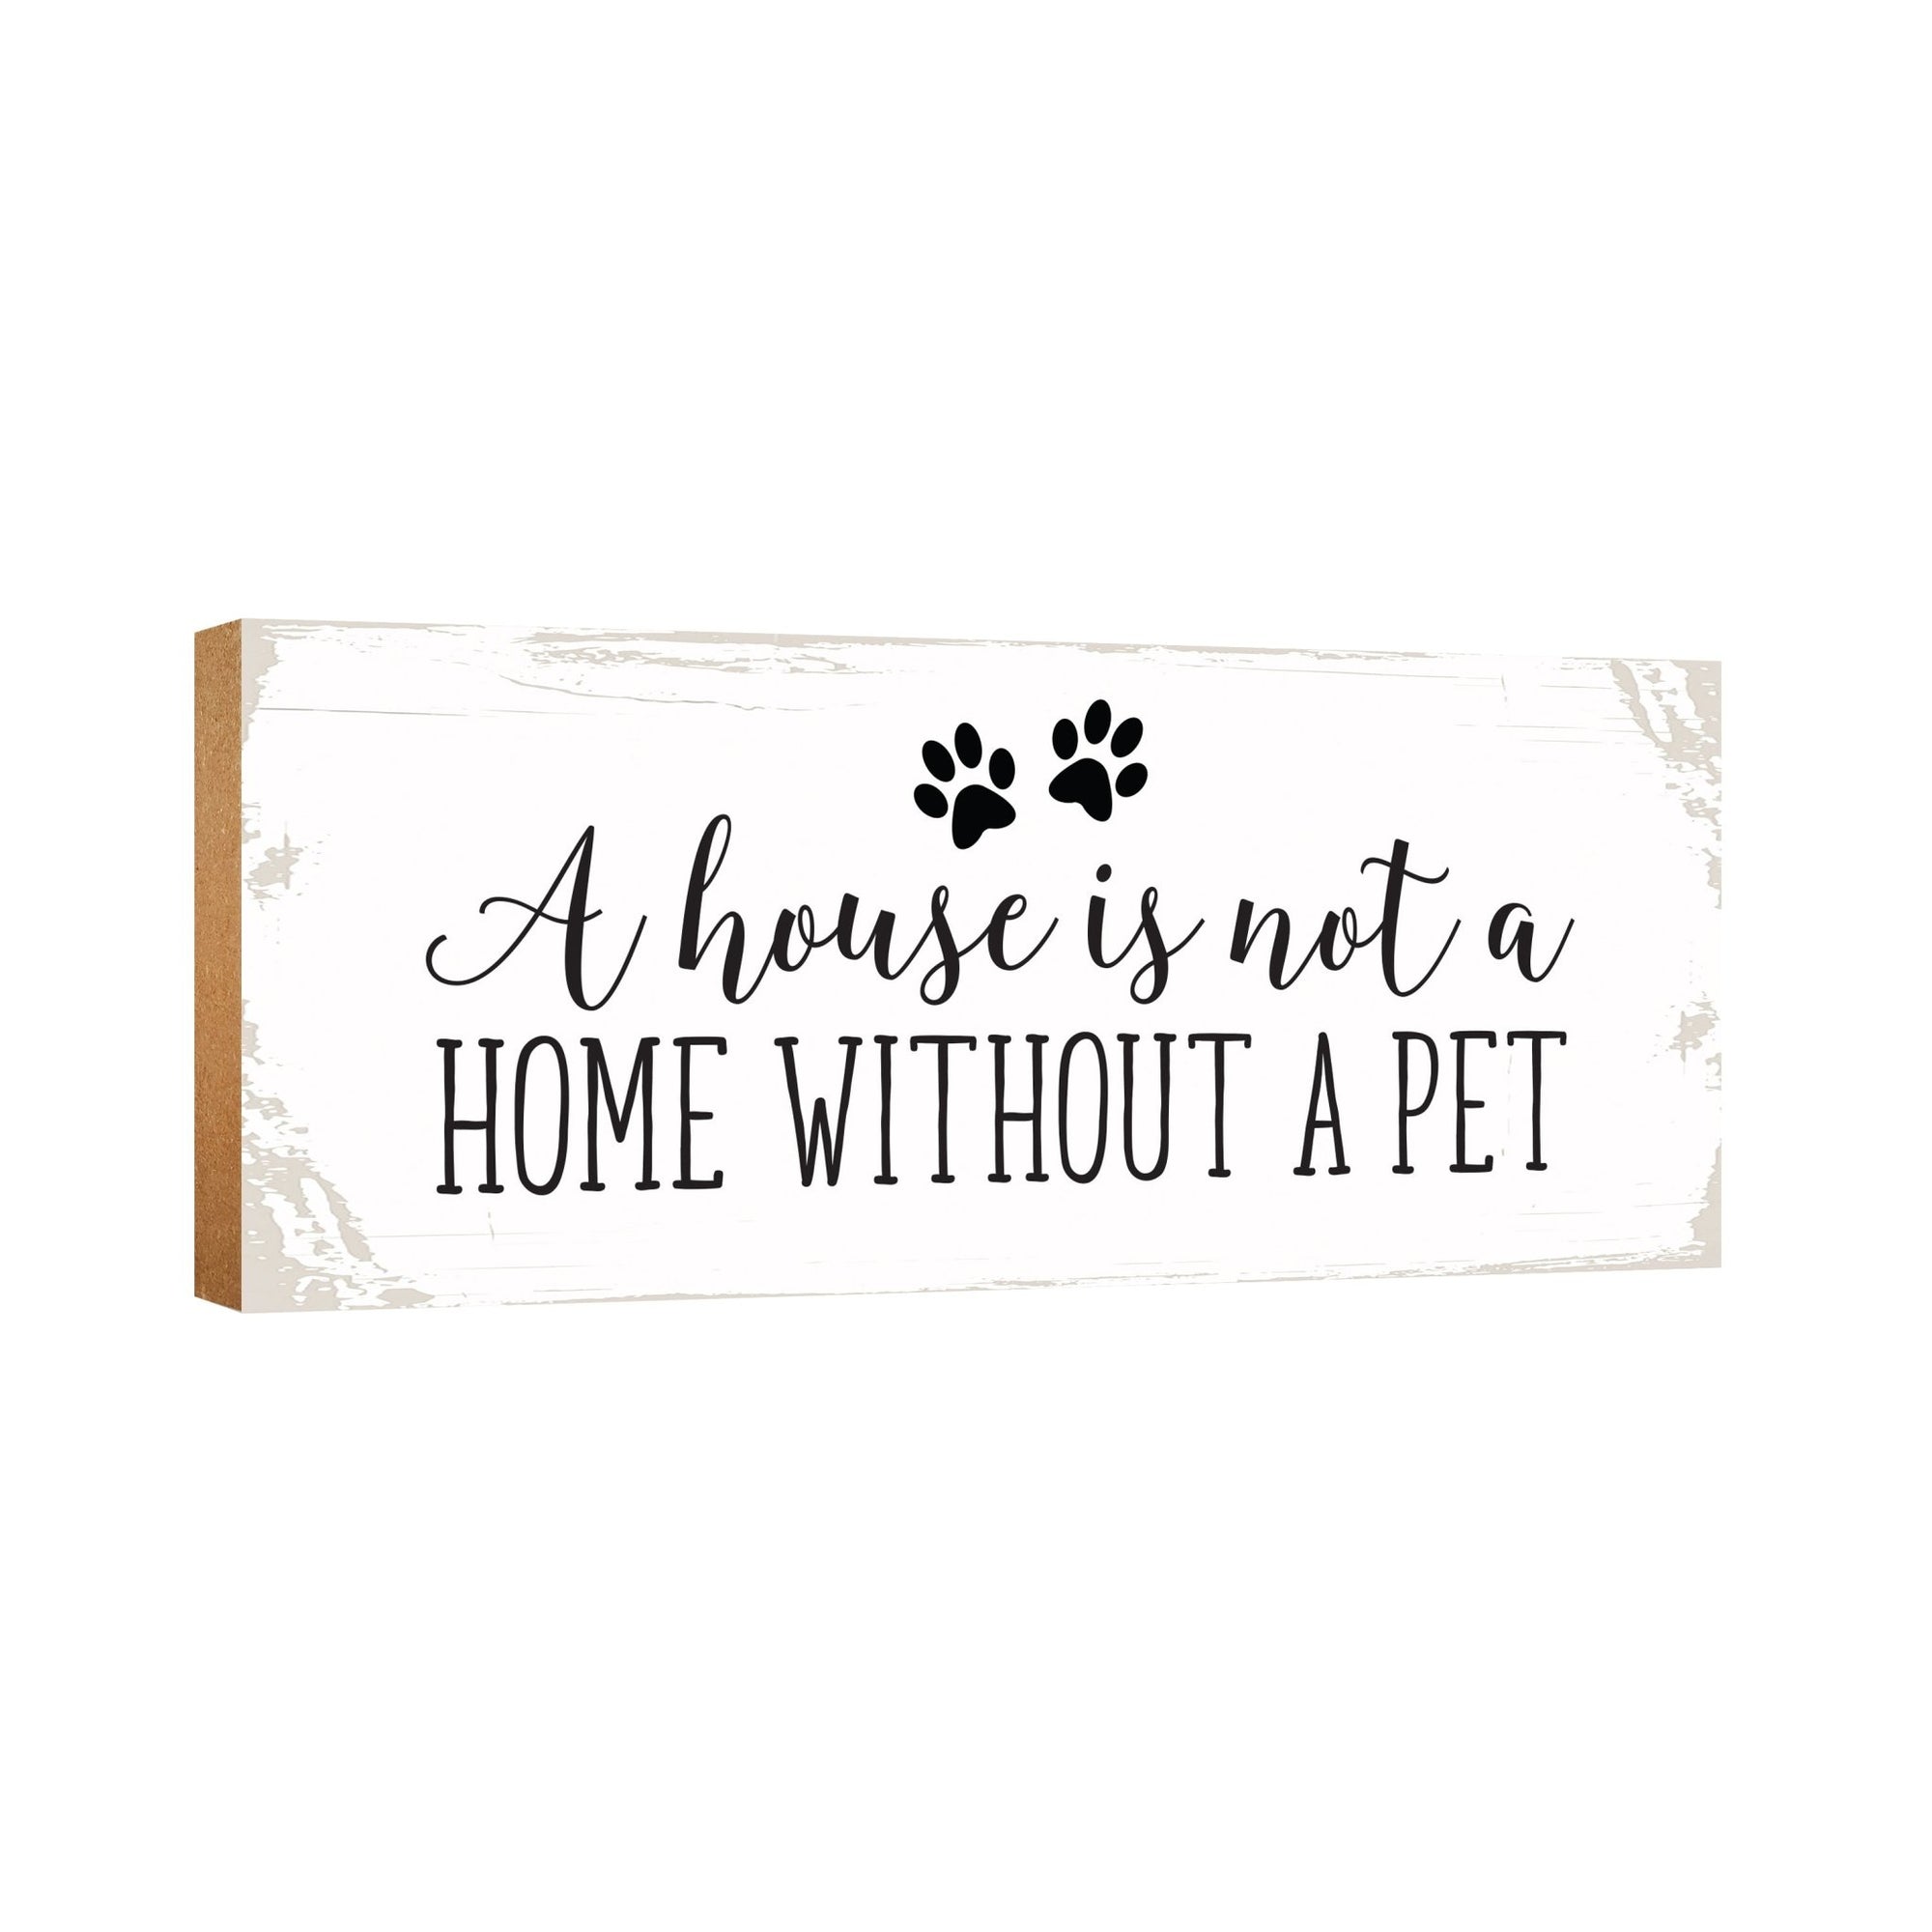 Modern Inspirational Pet Memorial 4x10 inches Wooden Sign (A House Is Not A Home) Tabletop Plaque Home Decoration Loss of Pet Bereavement Sympathy Keepsake - LifeSong Milestones